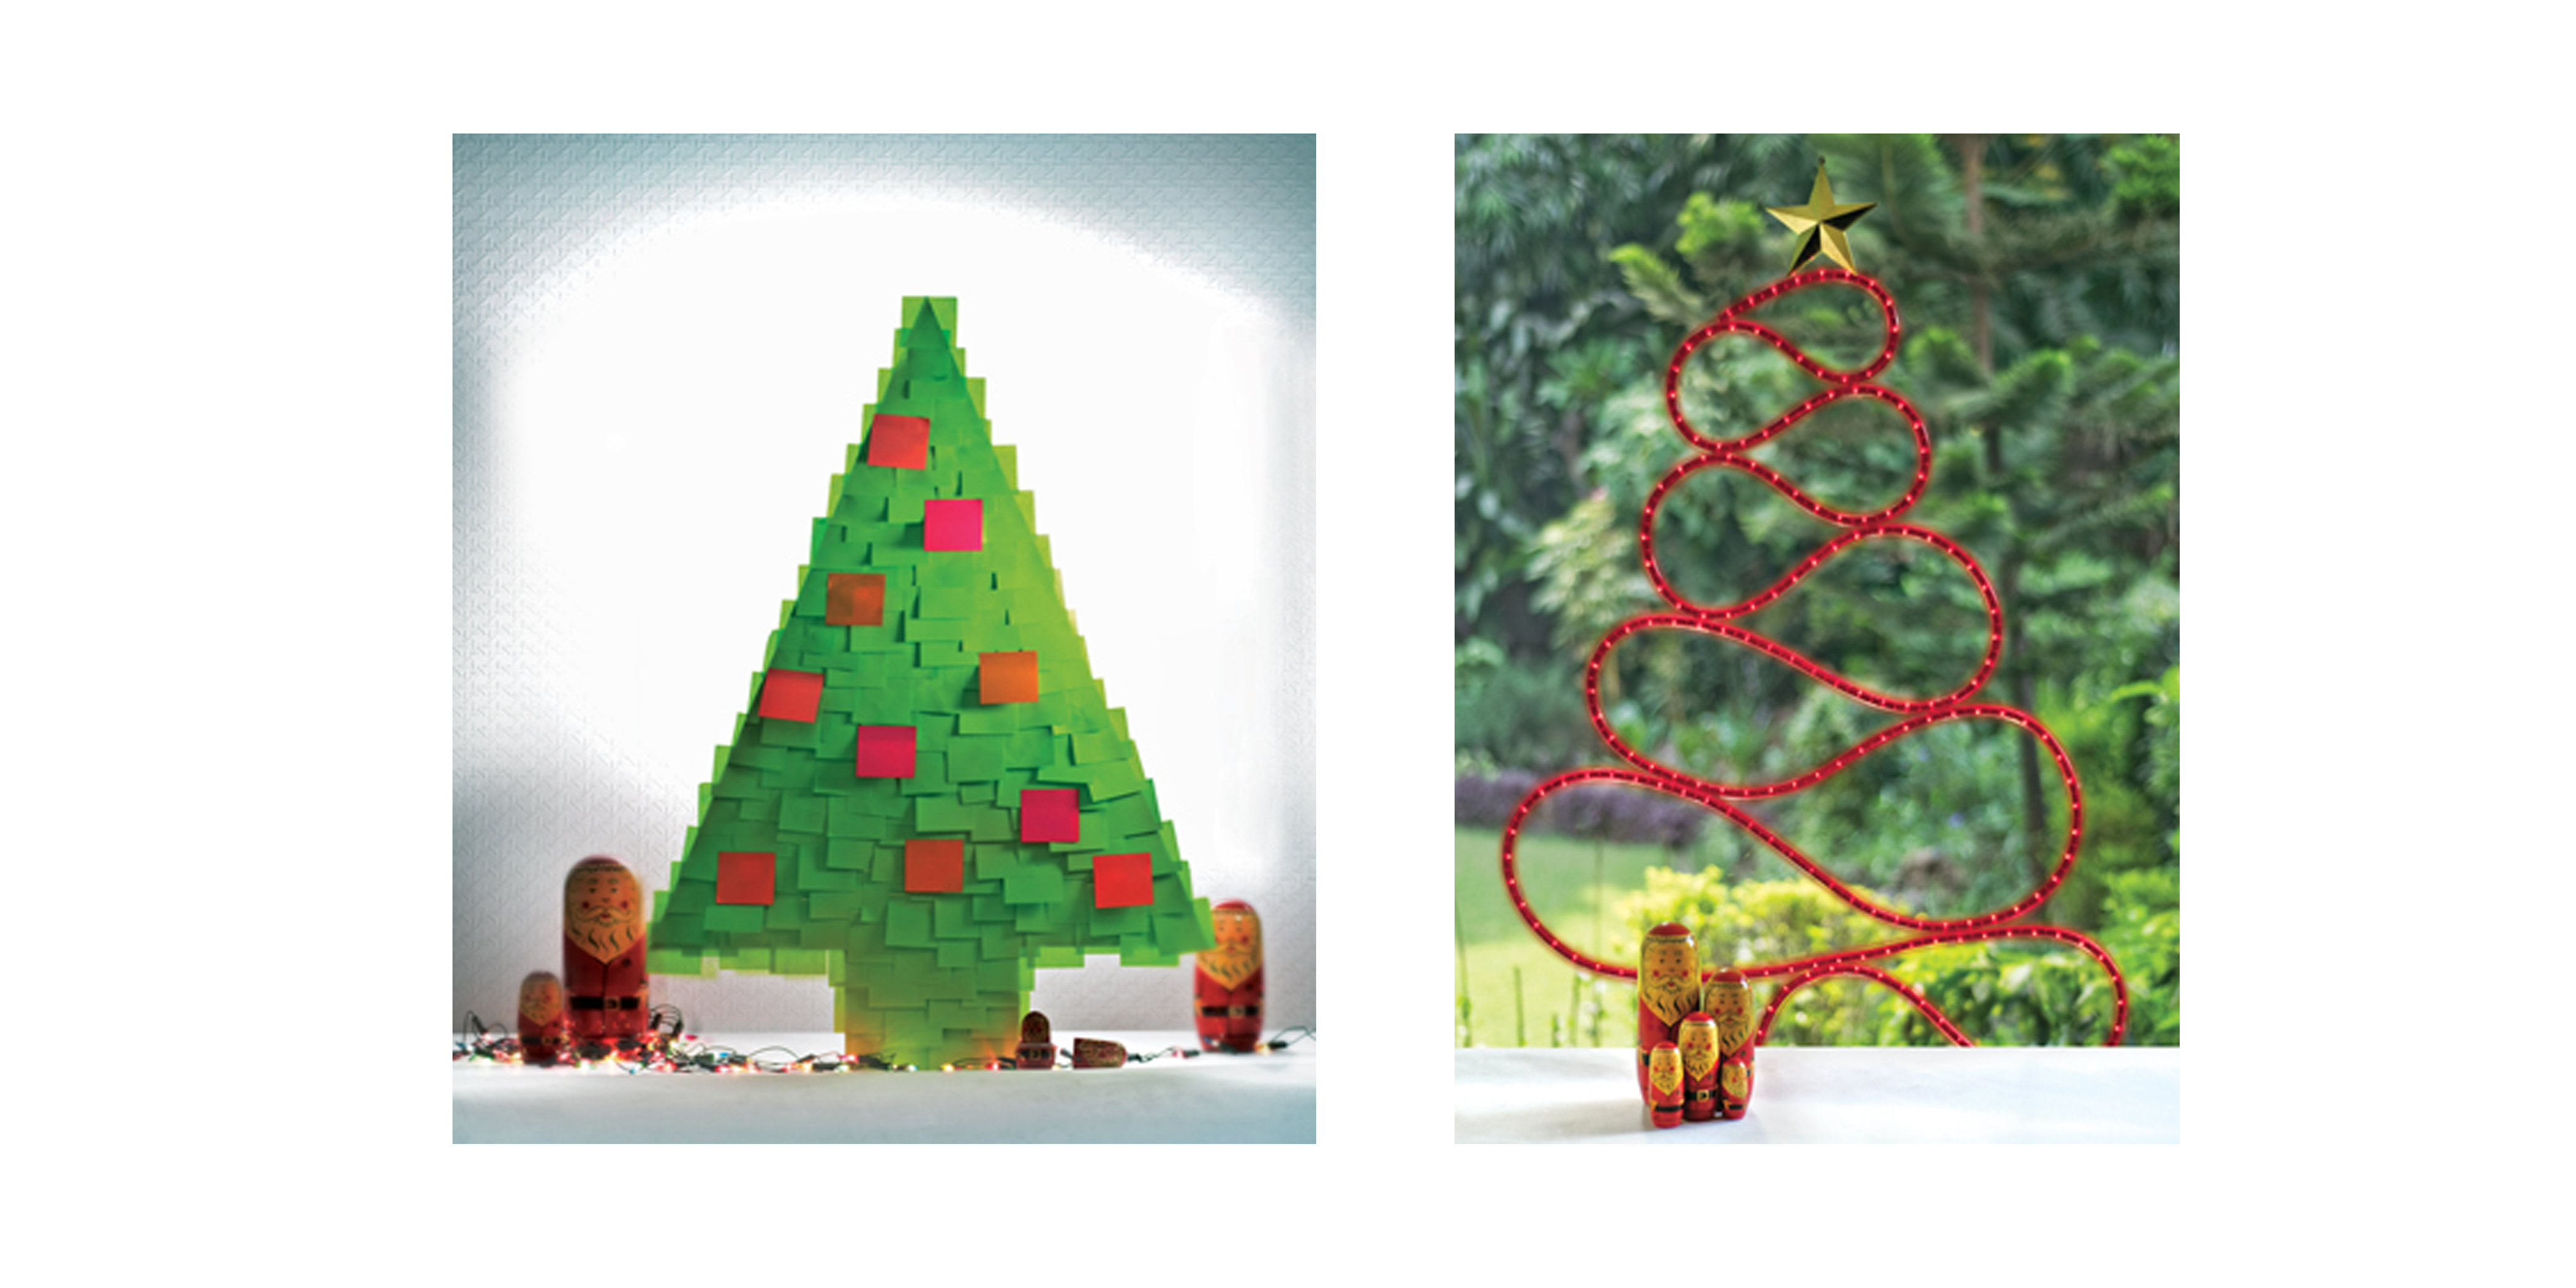 You Can Get A LEGO Christmas Tree To Build Your Way to The Holidays